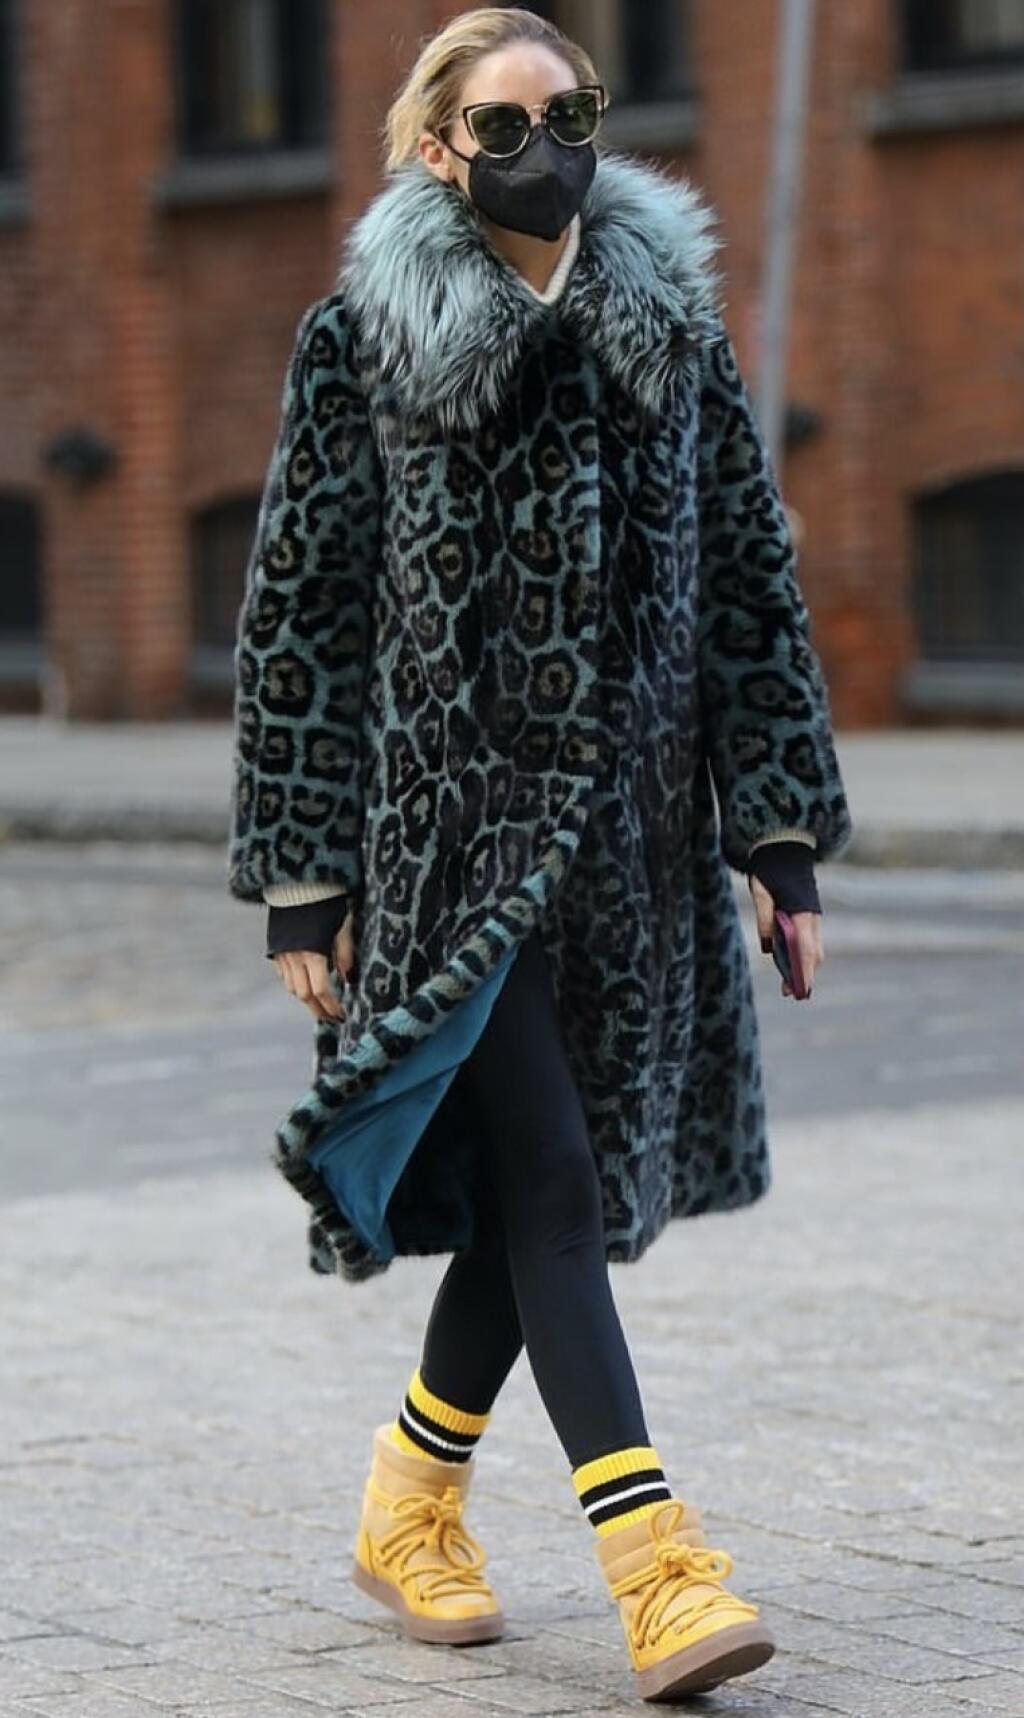 Leopard-Print-Coat. 60+ Most Fashionable '90s Outfit Ideas For Ladies That Are Coming Back in 2022